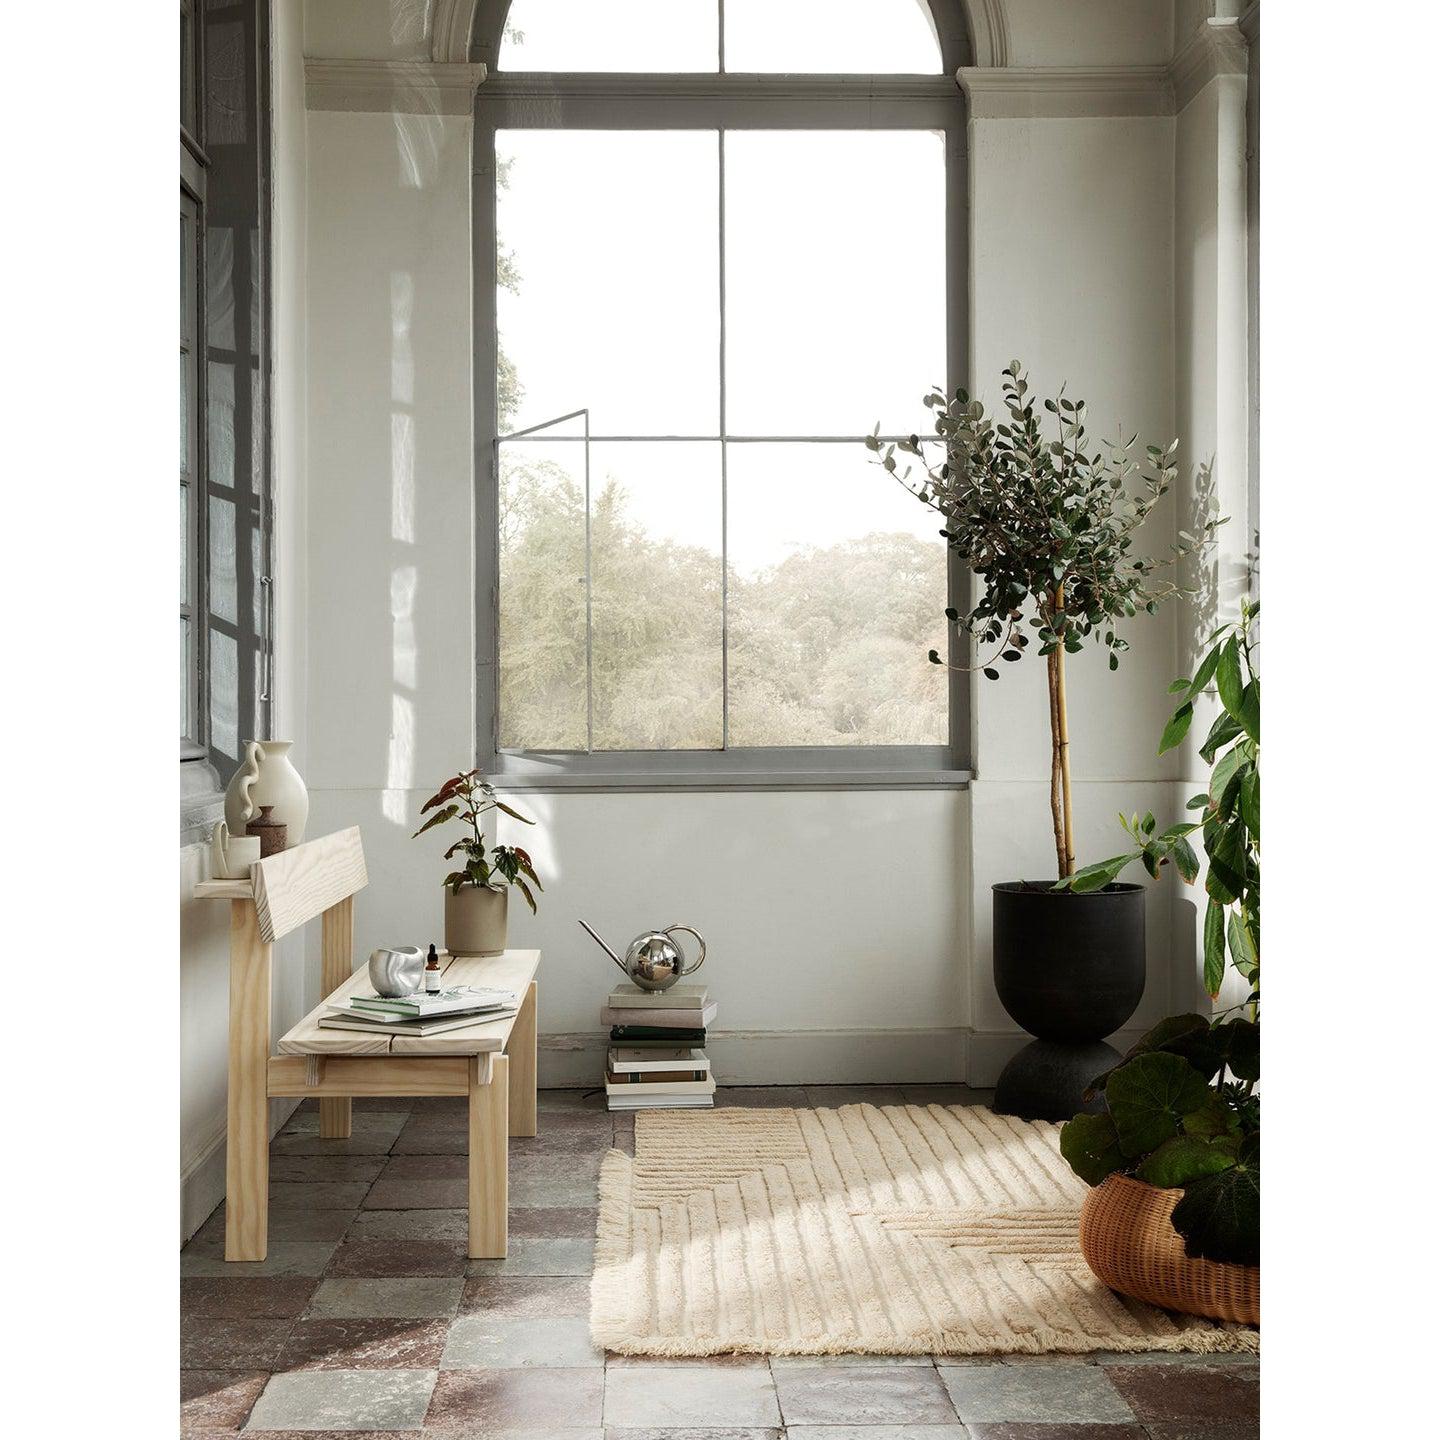 Rugs by Roo | ferm LIVING Crease Wool Rug Light Sand Small Area Rug-1104264661